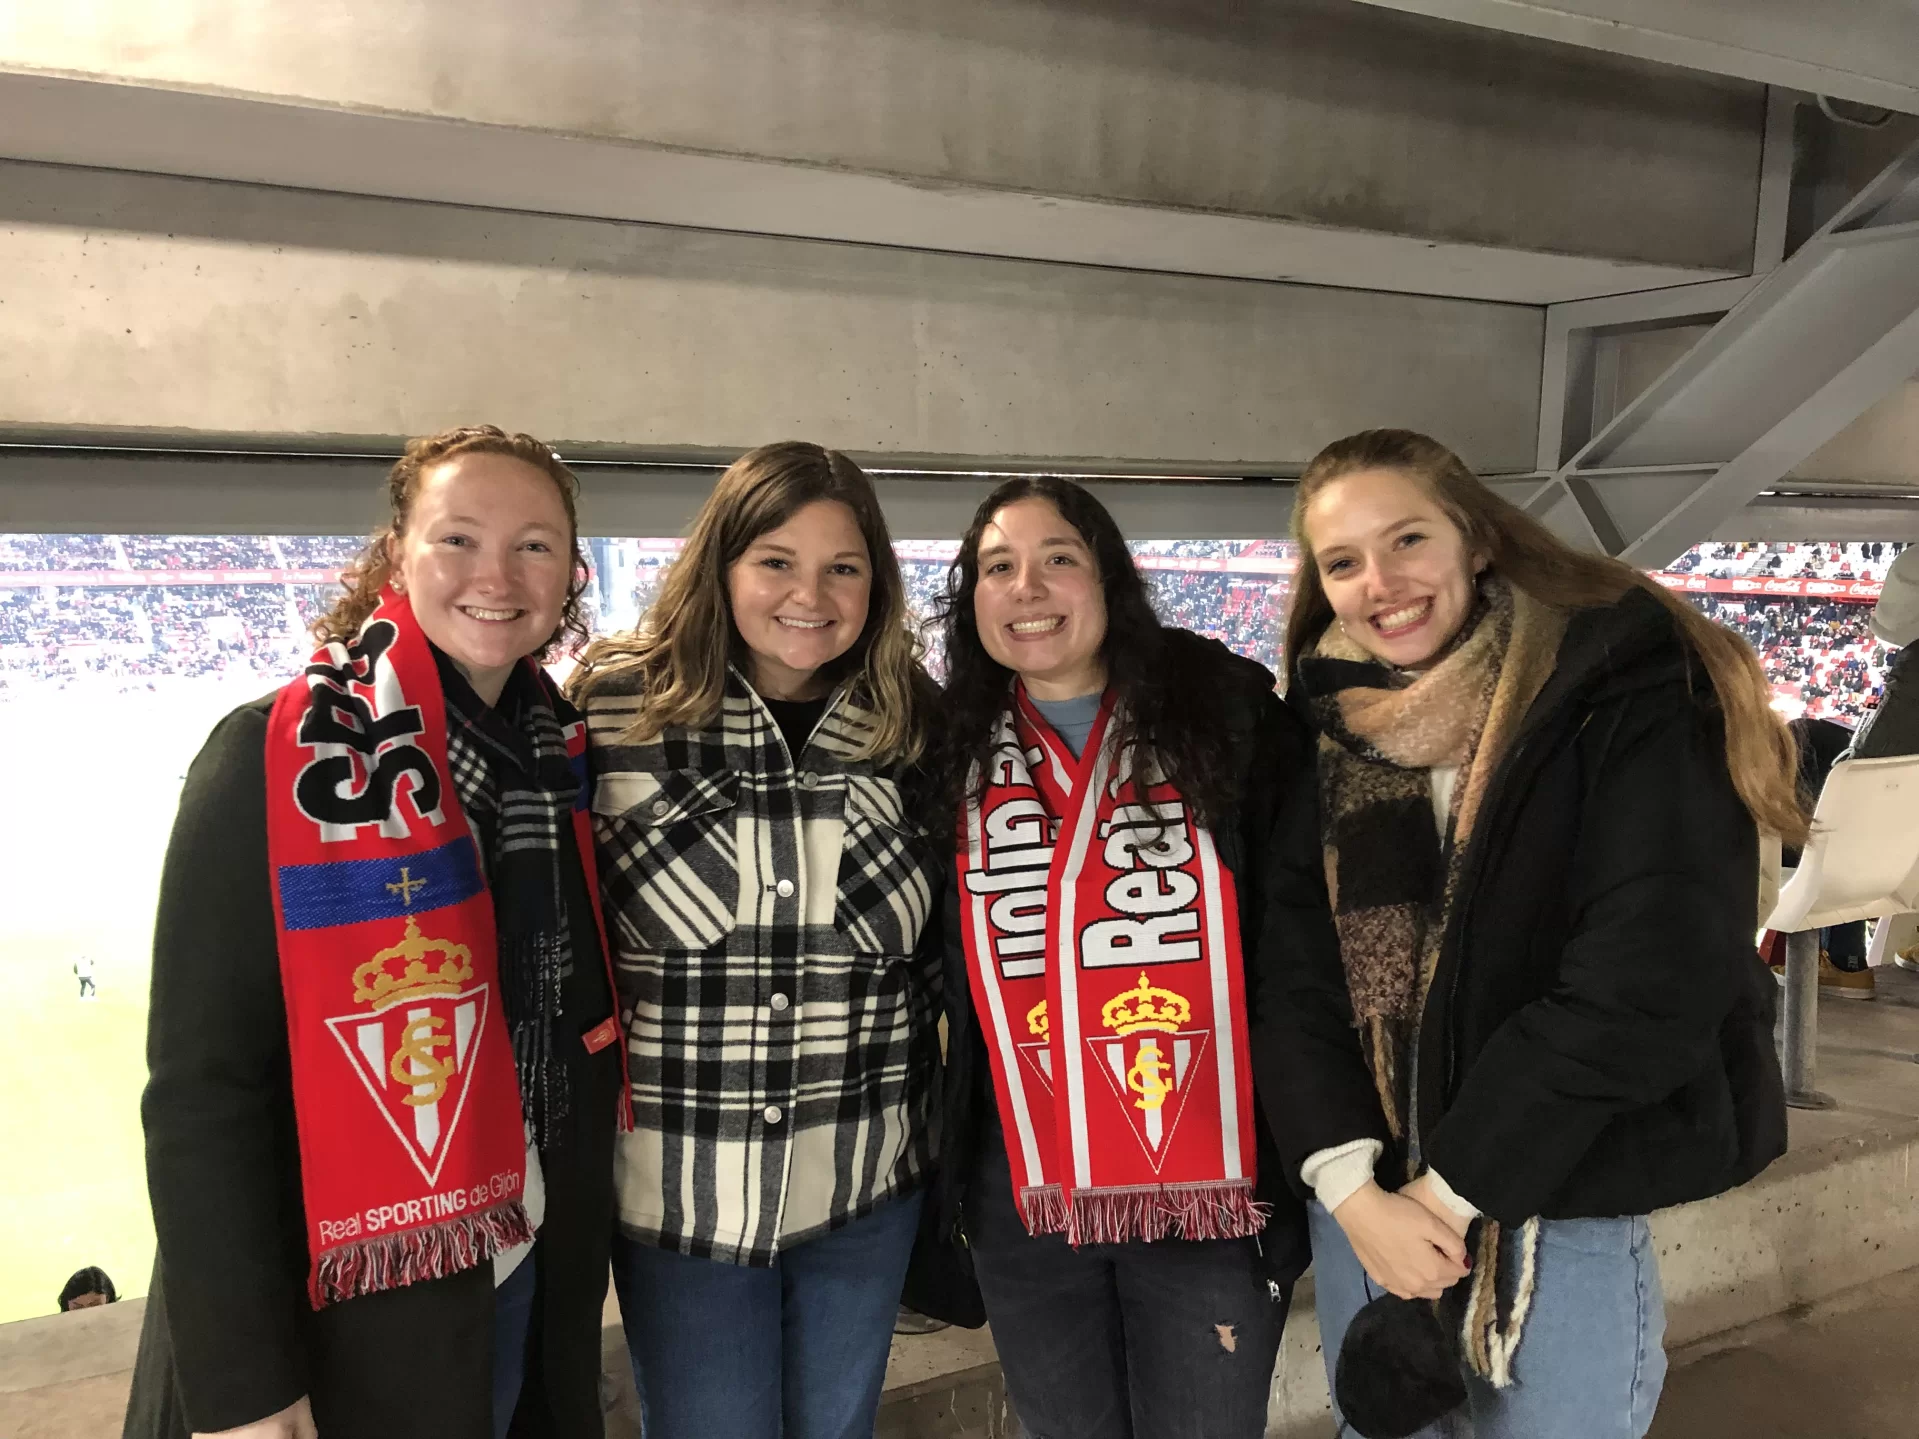 Julia Maluf '21, second from right, attends a Real Sporting de Gijón soccer game with past and current Fulbright scholars, at Estadio Municipal El Molinón-Enrique Castro "Quini", in Asturias, Spain. (Julia Maluf)